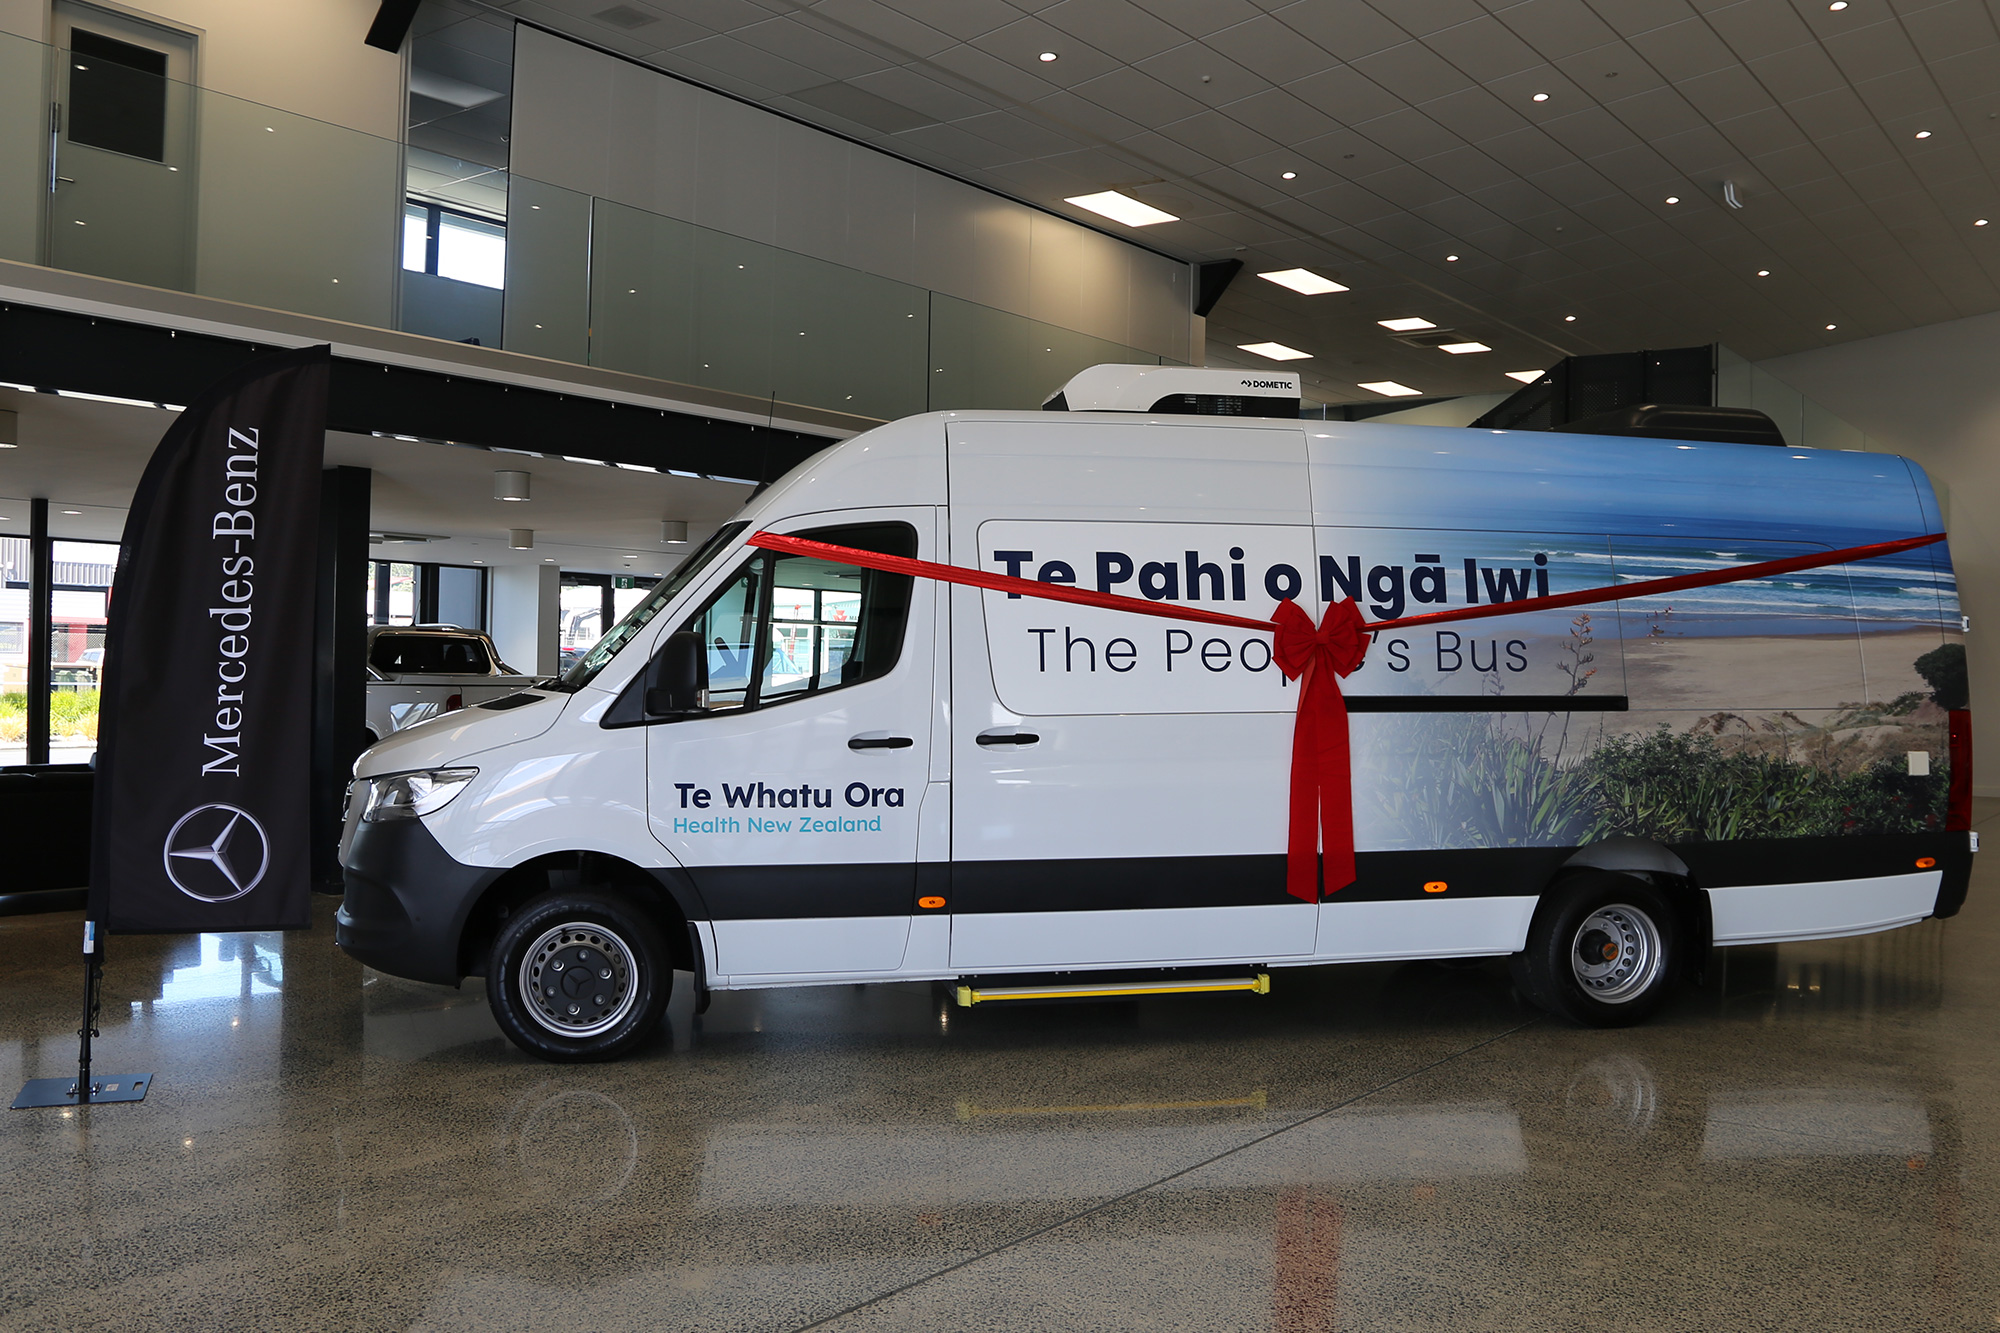 The Mercedes-Benz Sprinter is a fully equipped diagnostic clinic 